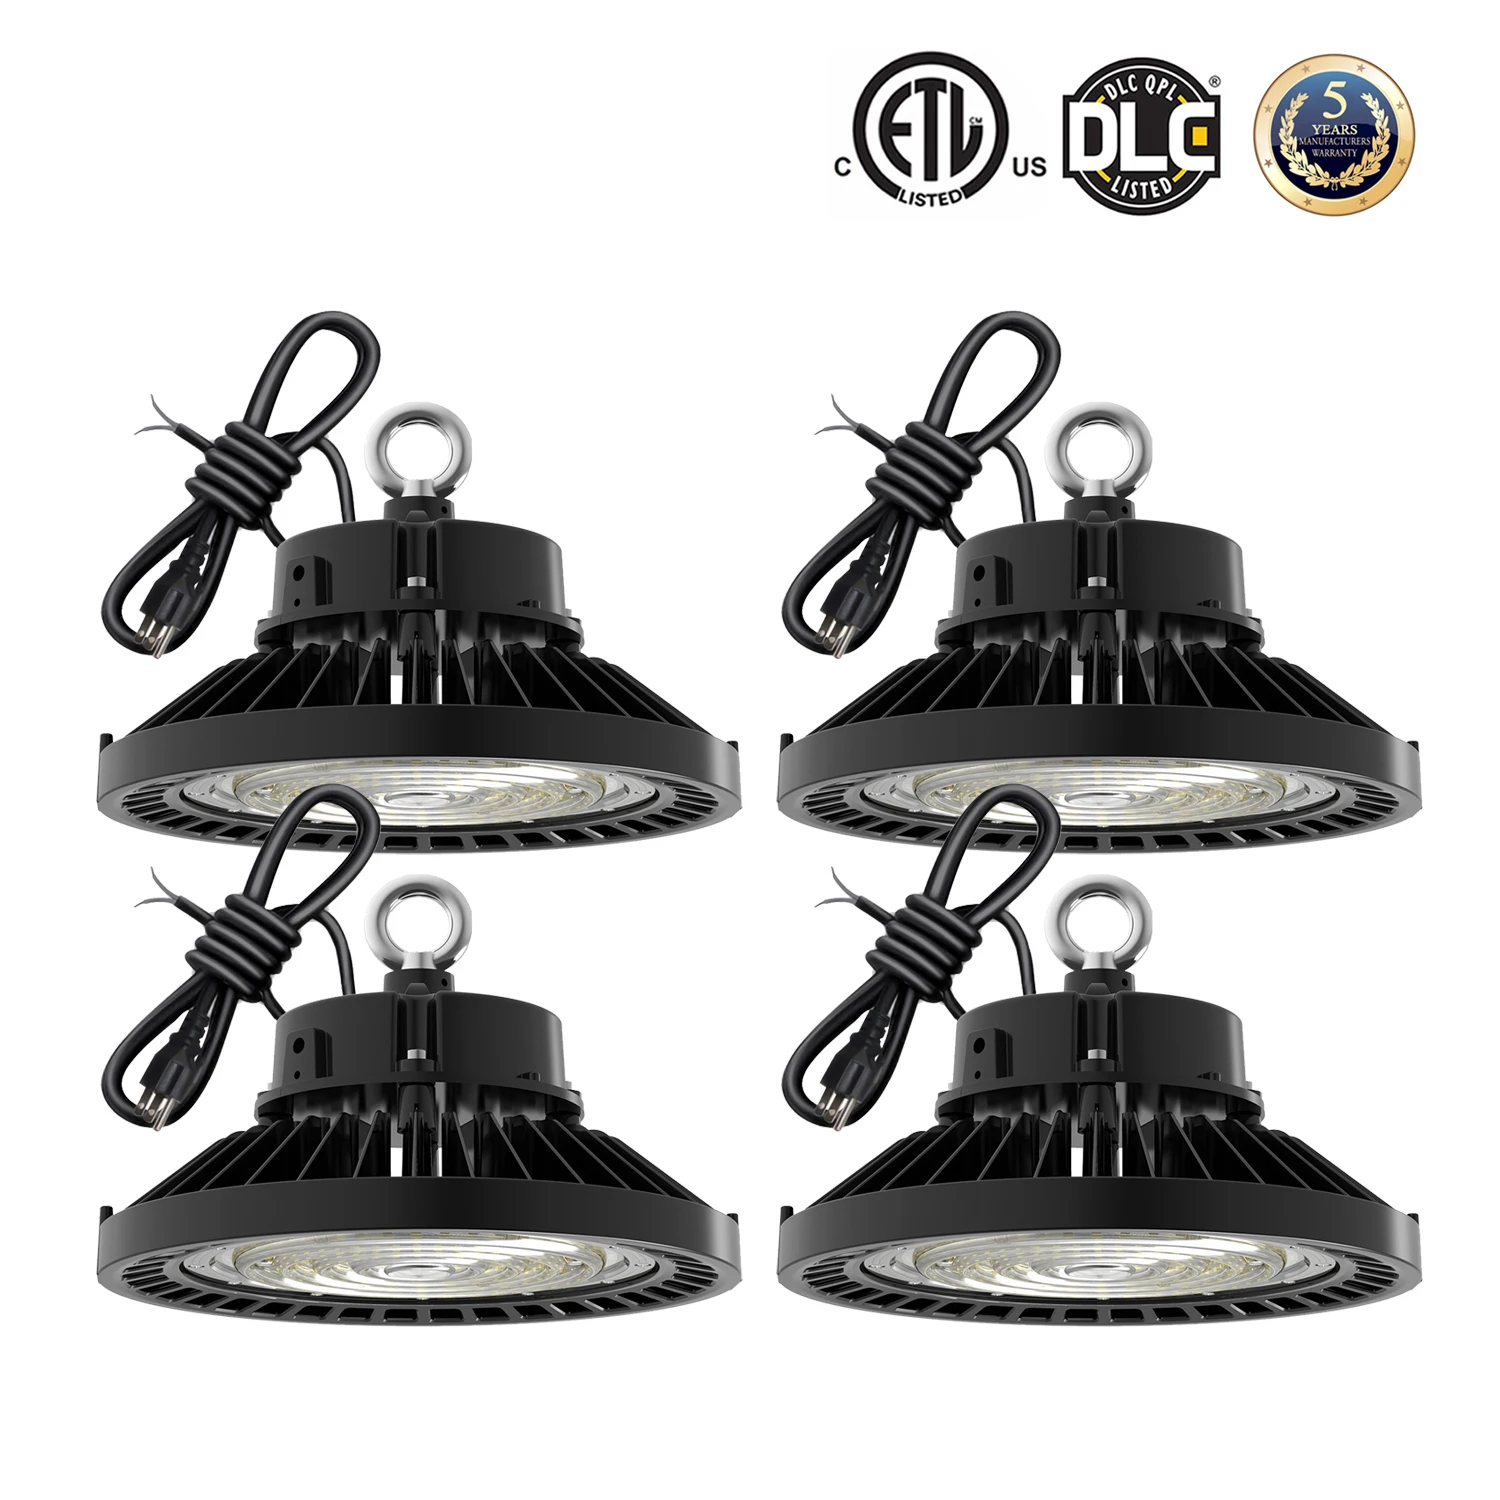 

4 Pack 100W 150W 200W 240W UFO Led High Bay Light 1-10V Dimmable Commercial Industrial Lamp Warehouse Garage Shop Lighting 5000K